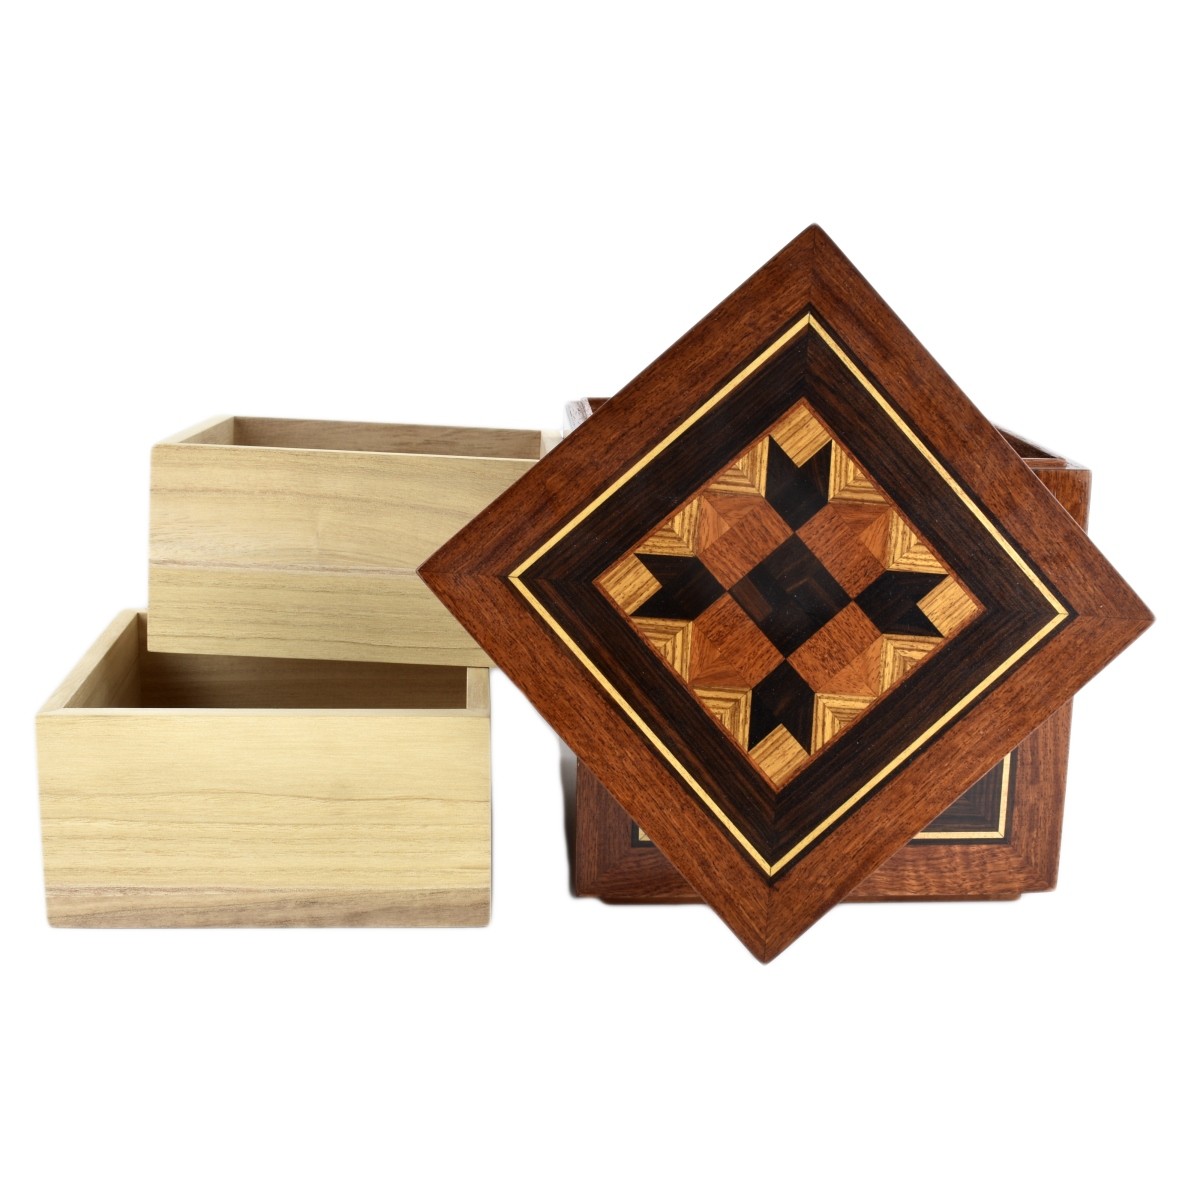 Pair of Vintage Marquetry Inlaid Boxes